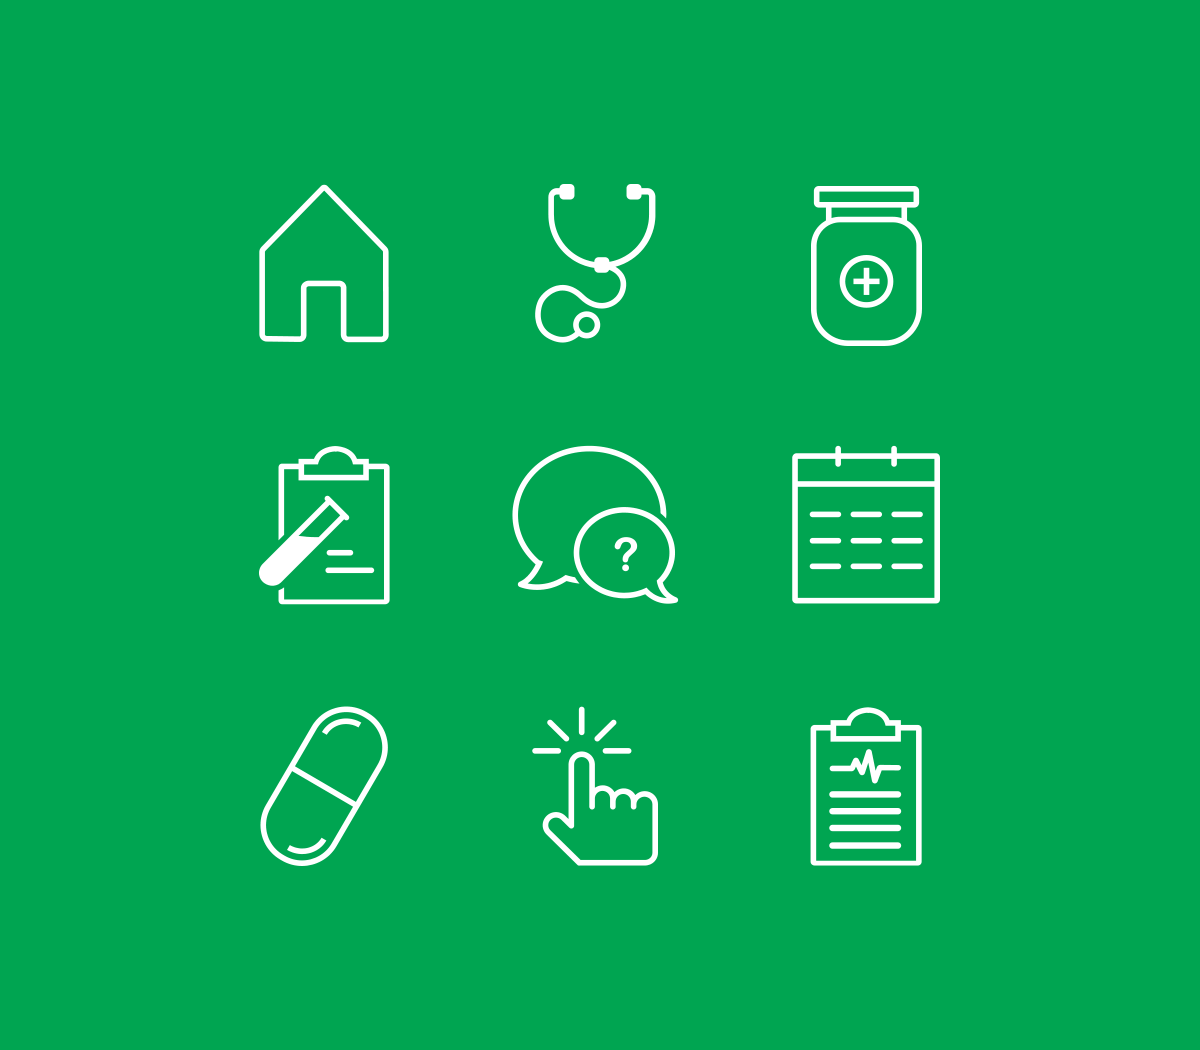 Download Free Healthcare Icon At Vectorified Com Collection Of Free Healthcare Icon Free For Personal Use PSD Mockup Templates